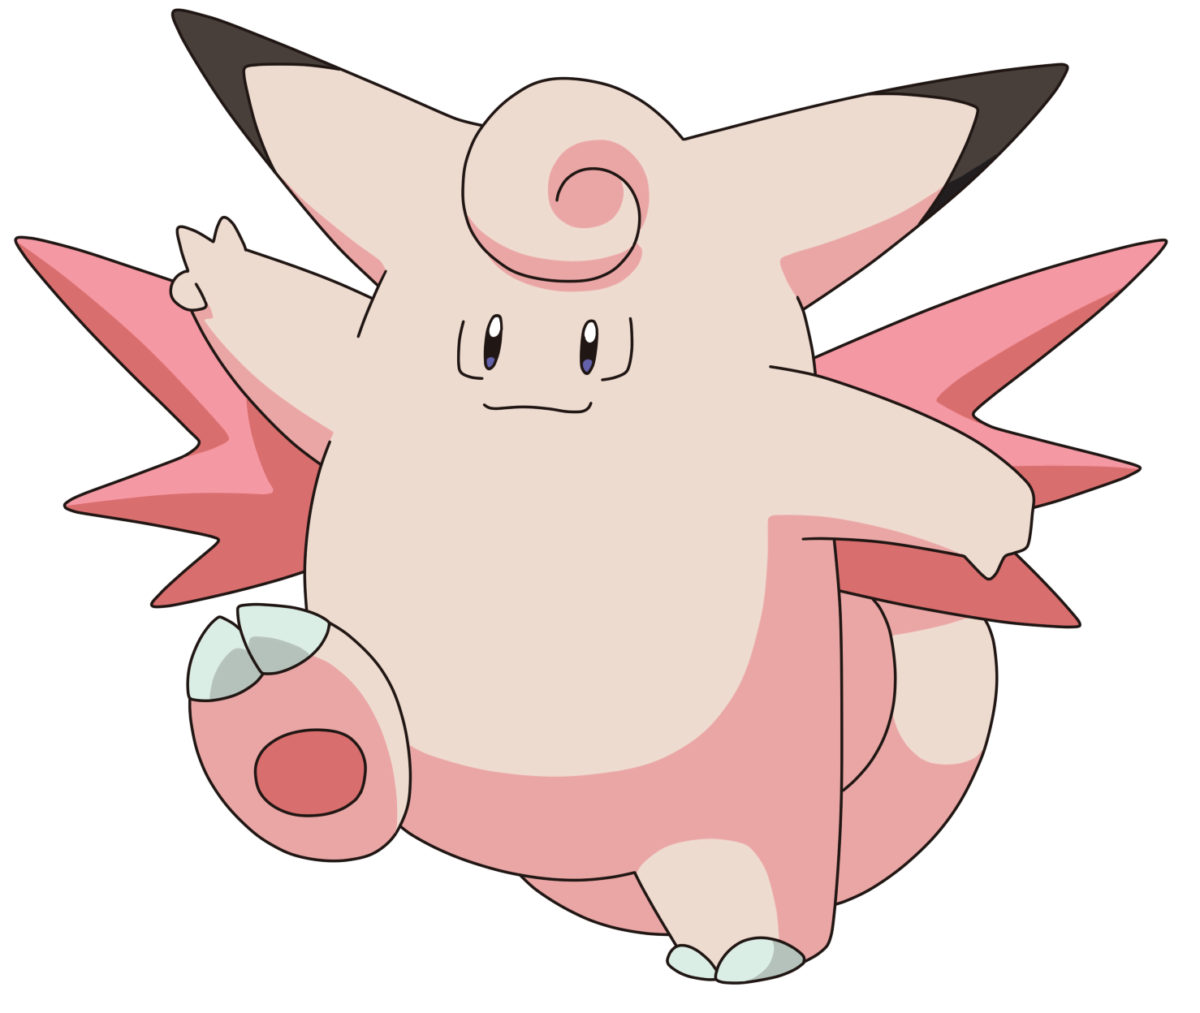 036-Clefable by Tzblacktd on DeviantArt